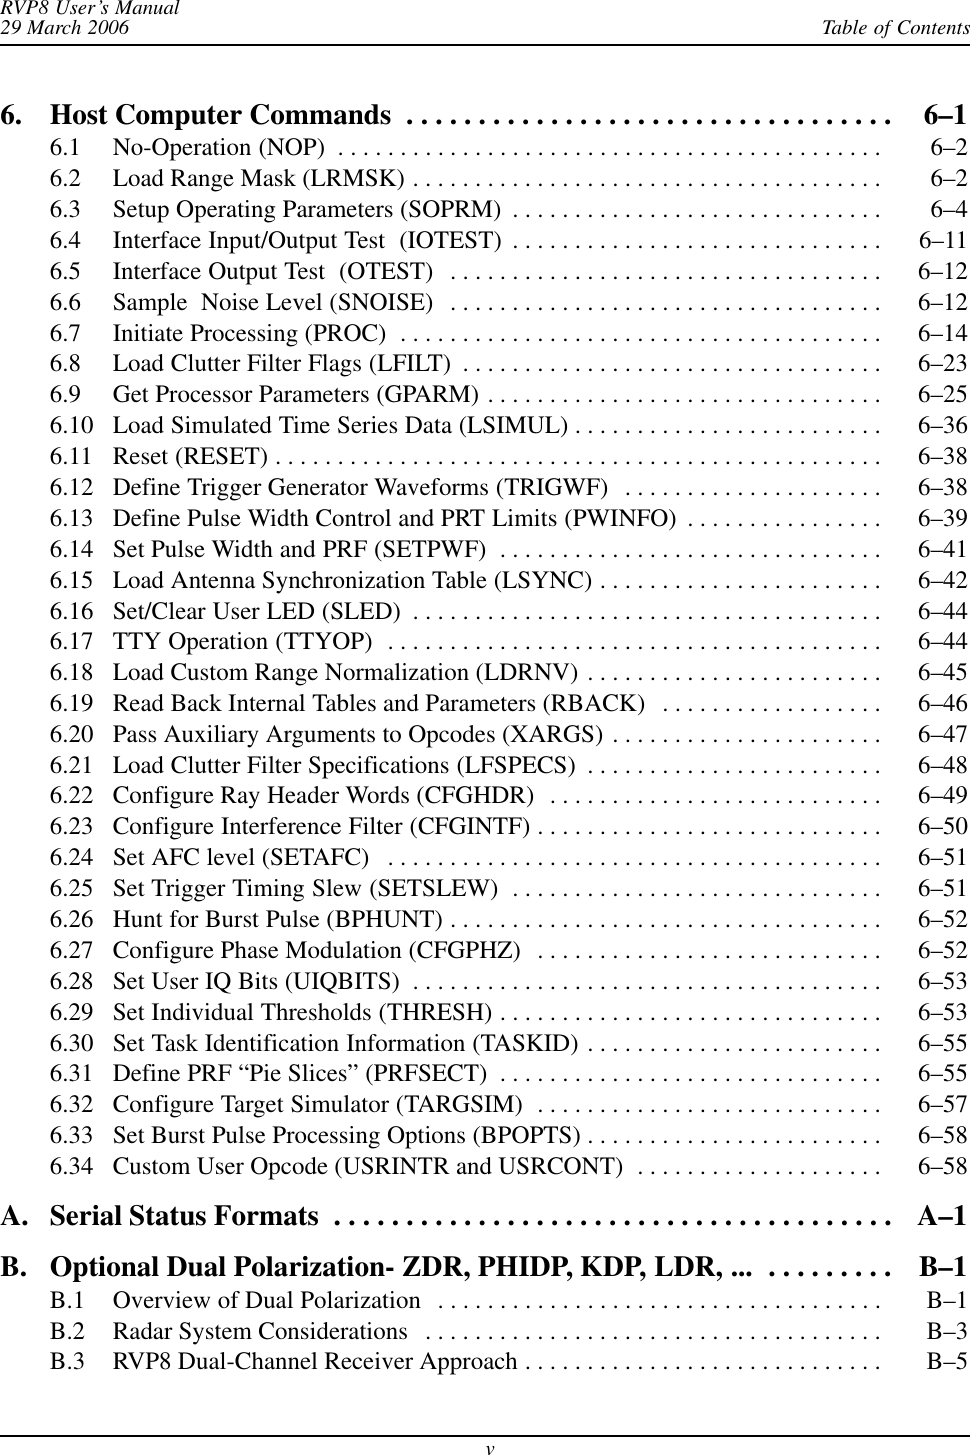 Table of ContentsRVP8 User’s Manual29 March 2006v6. Host Computer Commands 6–1 . . . . . . . . . . . . . . . . . . . . . . . . . . . . . . . . . . 6.1 No-Operation (NOP) 6–2 . . . . . . . . . . . . . . . . . . . . . . . . . . . . . . . . . . . . . . . . . . . . 6.2 Load Range Mask (LRMSK) 6–2 . . . . . . . . . . . . . . . . . . . . . . . . . . . . . . . . . . . . . . 6.3 Setup Operating Parameters (SOPRM) 6–4 . . . . . . . . . . . . . . . . . . . . . . . . . . . . . . 6.4 Interface Input/Output Test  (IOTEST) 6–11 . . . . . . . . . . . . . . . . . . . . . . . . . . . . . . 6.5 Interface Output Test  (OTEST) 6–12 . . . . . . . . . . . . . . . . . . . . . . . . . . . . . . . . . . . 6.6 Sample  Noise Level (SNOISE) 6–12 . . . . . . . . . . . . . . . . . . . . . . . . . . . . . . . . . . . 6.7 Initiate Processing (PROC) 6–14 . . . . . . . . . . . . . . . . . . . . . . . . . . . . . . . . . . . . . . . 6.8 Load Clutter Filter Flags (LFILT) 6–23 . . . . . . . . . . . . . . . . . . . . . . . . . . . . . . . . . . 6.9 Get Processor Parameters (GPARM) 6–25 . . . . . . . . . . . . . . . . . . . . . . . . . . . . . . . . 6.10 Load Simulated Time Series Data (LSIMUL) 6–36 . . . . . . . . . . . . . . . . . . . . . . . . . 6.11 Reset (RESET) 6–38 . . . . . . . . . . . . . . . . . . . . . . . . . . . . . . . . . . . . . . . . . . . . . . . . . 6.12 Define Trigger Generator Waveforms (TRIGWF) 6–38 . . . . . . . . . . . . . . . . . . . . . 6.13 Define Pulse Width Control and PRT Limits (PWINFO) 6–39 . . . . . . . . . . . . . . . . 6.14 Set Pulse Width and PRF (SETPWF) 6–41 . . . . . . . . . . . . . . . . . . . . . . . . . . . . . . . 6.15 Load Antenna Synchronization Table (LSYNC) 6–42 . . . . . . . . . . . . . . . . . . . . . . . 6.16 Set/Clear User LED (SLED) 6–44 . . . . . . . . . . . . . . . . . . . . . . . . . . . . . . . . . . . . . . 6.17 TTY Operation (TTYOP) 6–44 . . . . . . . . . . . . . . . . . . . . . . . . . . . . . . . . . . . . . . . . 6.18 Load Custom Range Normalization (LDRNV) 6–45 . . . . . . . . . . . . . . . . . . . . . . . . 6.19 Read Back Internal Tables and Parameters (RBACK) 6–46 . . . . . . . . . . . . . . . . . . 6.20 Pass Auxiliary Arguments to Opcodes (XARGS) 6–47 . . . . . . . . . . . . . . . . . . . . . . 6.21 Load Clutter Filter Specifications (LFSPECS) 6–48 . . . . . . . . . . . . . . . . . . . . . . . . 6.22 Configure Ray Header Words (CFGHDR) 6–49 . . . . . . . . . . . . . . . . . . . . . . . . . . . 6.23 Configure Interference Filter (CFGINTF) 6–50 . . . . . . . . . . . . . . . . . . . . . . . . . . . . 6.24 Set AFC level (SETAFC) 6–51 . . . . . . . . . . . . . . . . . . . . . . . . . . . . . . . . . . . . . . . . 6.25 Set Trigger Timing Slew (SETSLEW) 6–51 . . . . . . . . . . . . . . . . . . . . . . . . . . . . . . 6.26 Hunt for Burst Pulse (BPHUNT) 6–52 . . . . . . . . . . . . . . . . . . . . . . . . . . . . . . . . . . . 6.27 Configure Phase Modulation (CFGPHZ) 6–52 . . . . . . . . . . . . . . . . . . . . . . . . . . . . 6.28 Set User IQ Bits (UIQBITS) 6–53 . . . . . . . . . . . . . . . . . . . . . . . . . . . . . . . . . . . . . . 6.29 Set Individual Thresholds (THRESH) 6–53 . . . . . . . . . . . . . . . . . . . . . . . . . . . . . . . 6.30 Set Task Identification Information (TASKID) 6–55 . . . . . . . . . . . . . . . . . . . . . . . . 6.31 Define PRF “Pie Slices” (PRFSECT) 6–55 . . . . . . . . . . . . . . . . . . . . . . . . . . . . . . . 6.32 Configure Target Simulator (TARGSIM) 6–57 . . . . . . . . . . . . . . . . . . . . . . . . . . . . 6.33 Set Burst Pulse Processing Options (BPOPTS) 6–58 . . . . . . . . . . . . . . . . . . . . . . . . 6.34 Custom User Opcode (USRINTR and USRCONT) 6–58 . . . . . . . . . . . . . . . . . . . . A. Serial Status Formats A–1 . . . . . . . . . . . . . . . . . . . . . . . . . . . . . . . . . . . . . . . B. Optional Dual Polarization- ZDR, PHIDP, KDP, LDR, ... B–1 . . . . . . . . . B.1 Overview of Dual Polarization B–1 . . . . . . . . . . . . . . . . . . . . . . . . . . . . . . . . . . . . B.2 Radar System Considerations B–3 . . . . . . . . . . . . . . . . . . . . . . . . . . . . . . . . . . . . . B.3 RVP8 Dual-Channel Receiver Approach B–5 . . . . . . . . . . . . . . . . . . . . . . . . . . . . . 